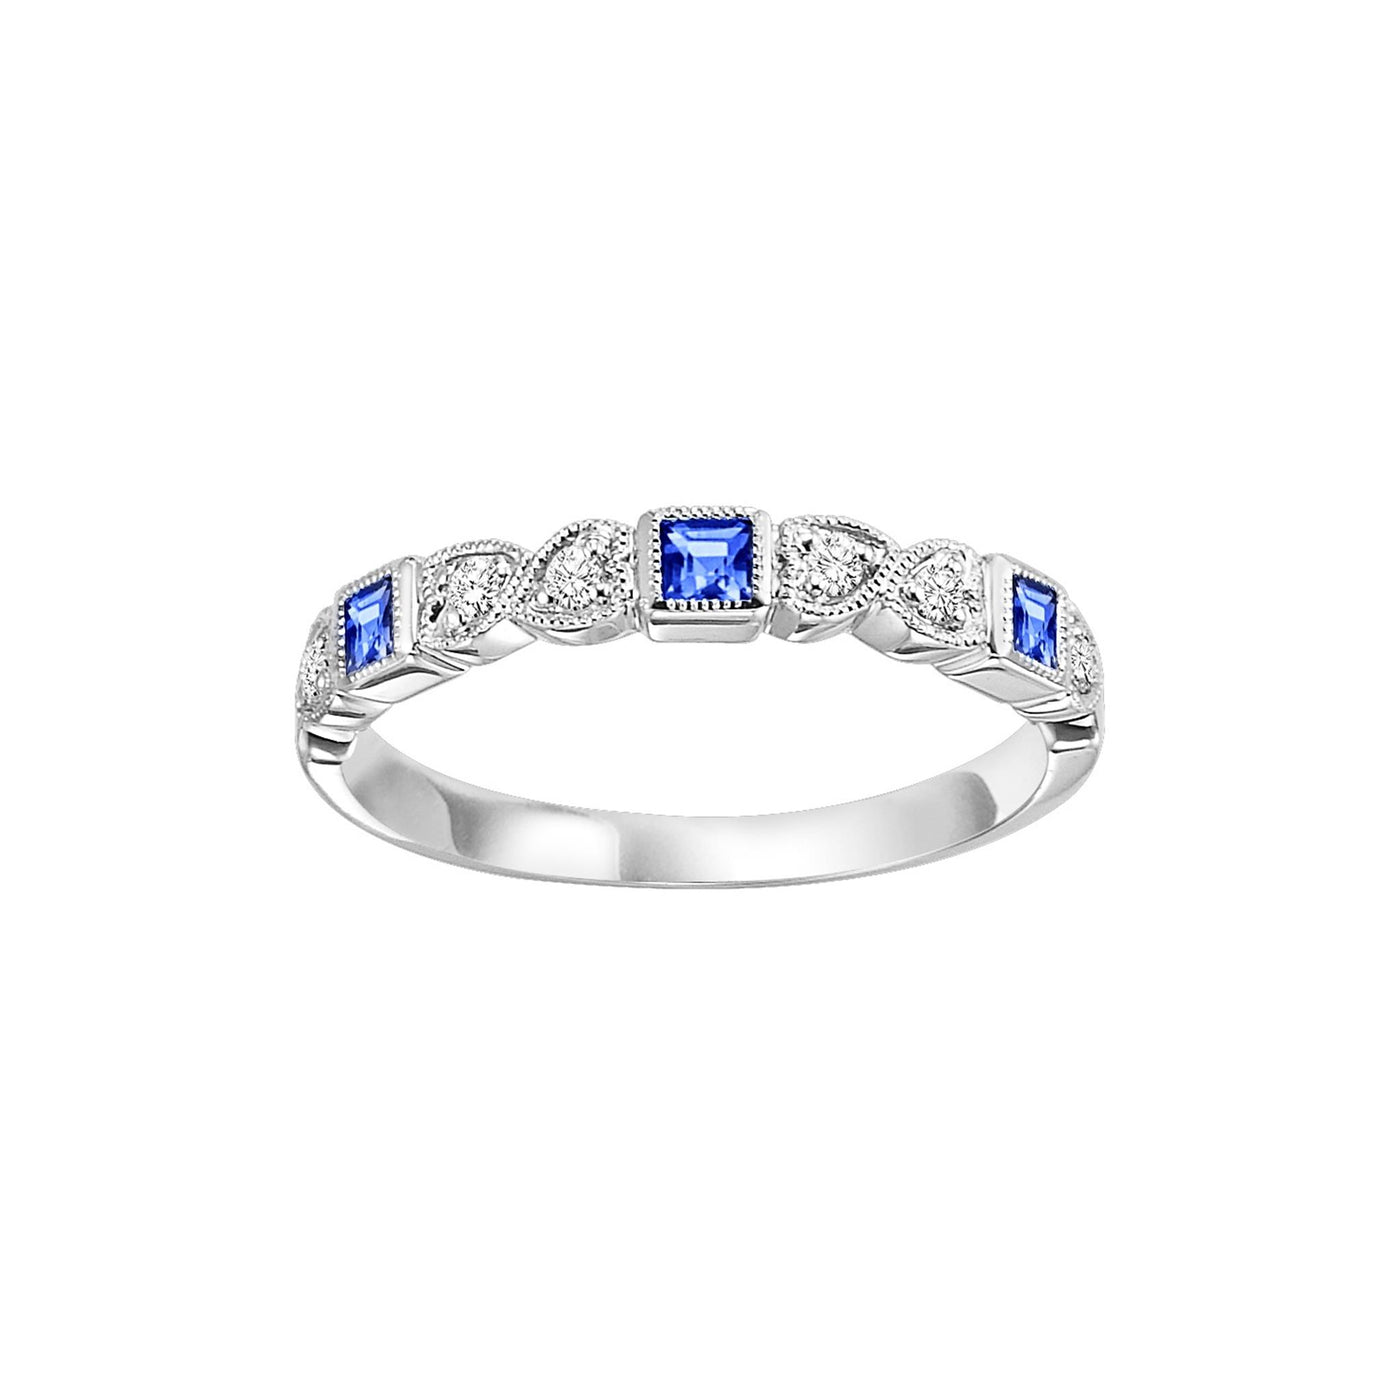 10K White Gold .14ctw Vintage Style Sapphire Ring with Diamonds